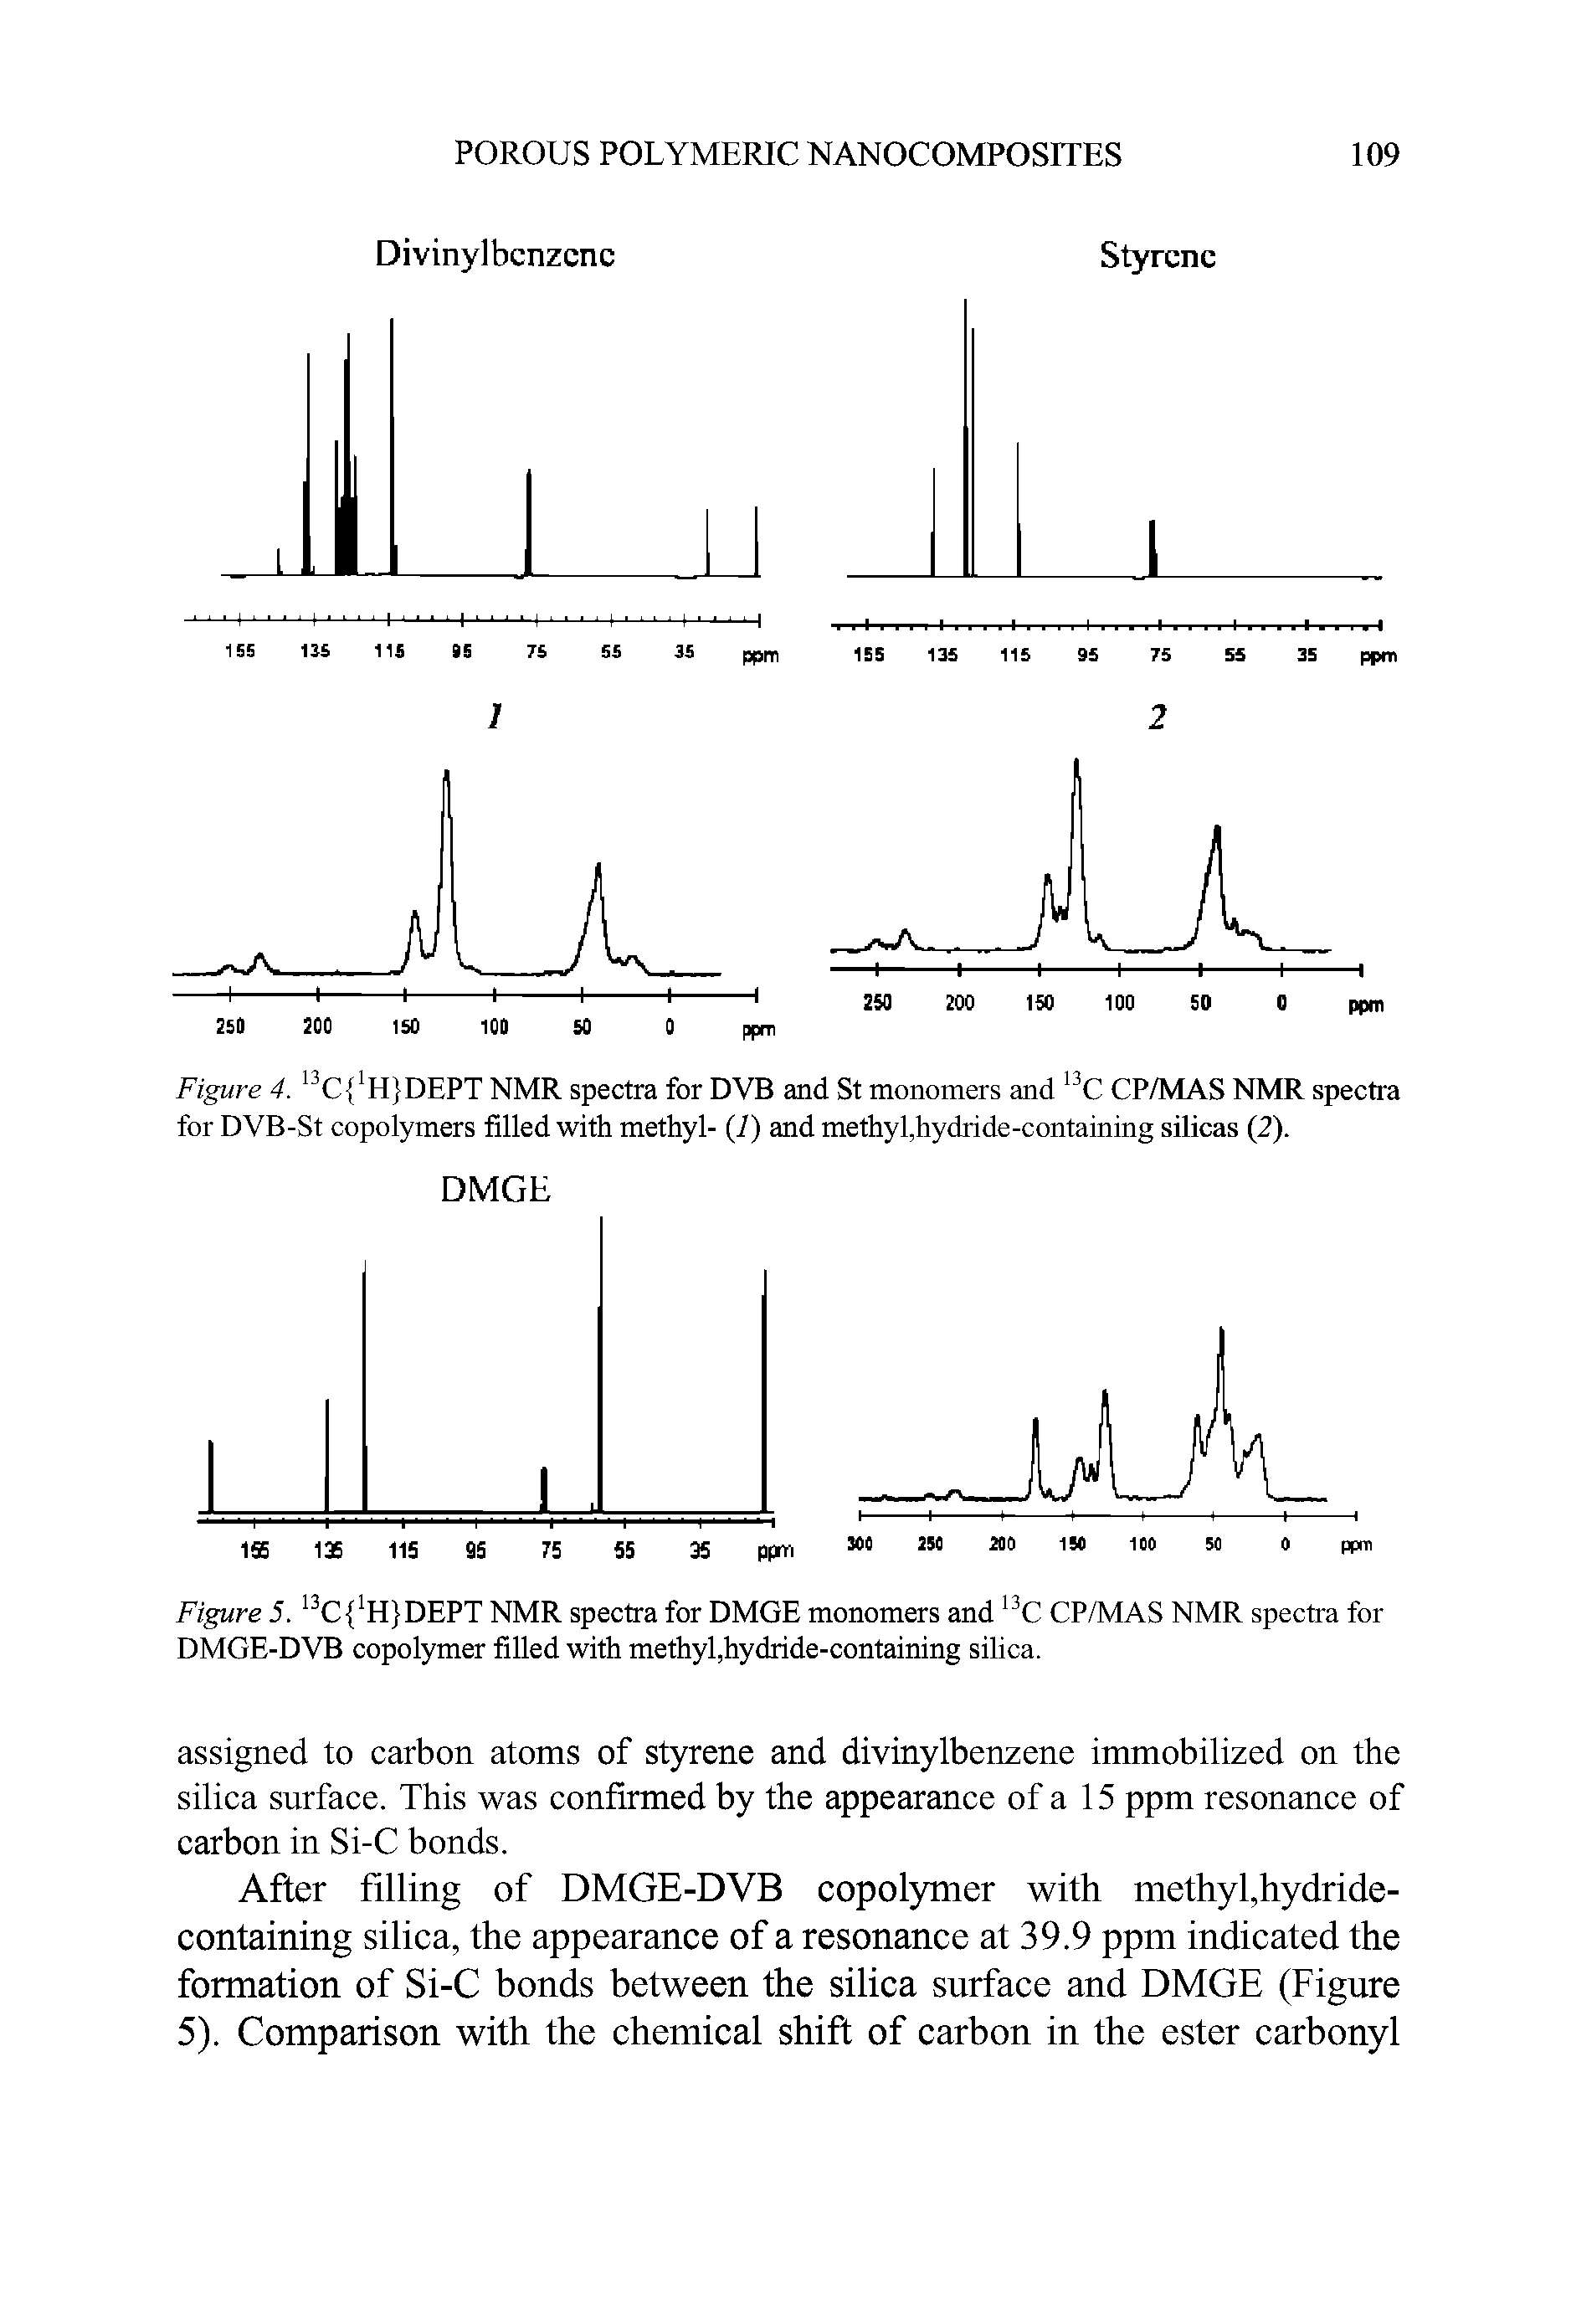 Figure 4. C 1FI [ DEPT NMR spectra for DVB and St monomers and 13C CP/MAS NMR spectra for DVB-St copolymers filled with methyl- (/) and methyl,hydride-containing silicas (2).